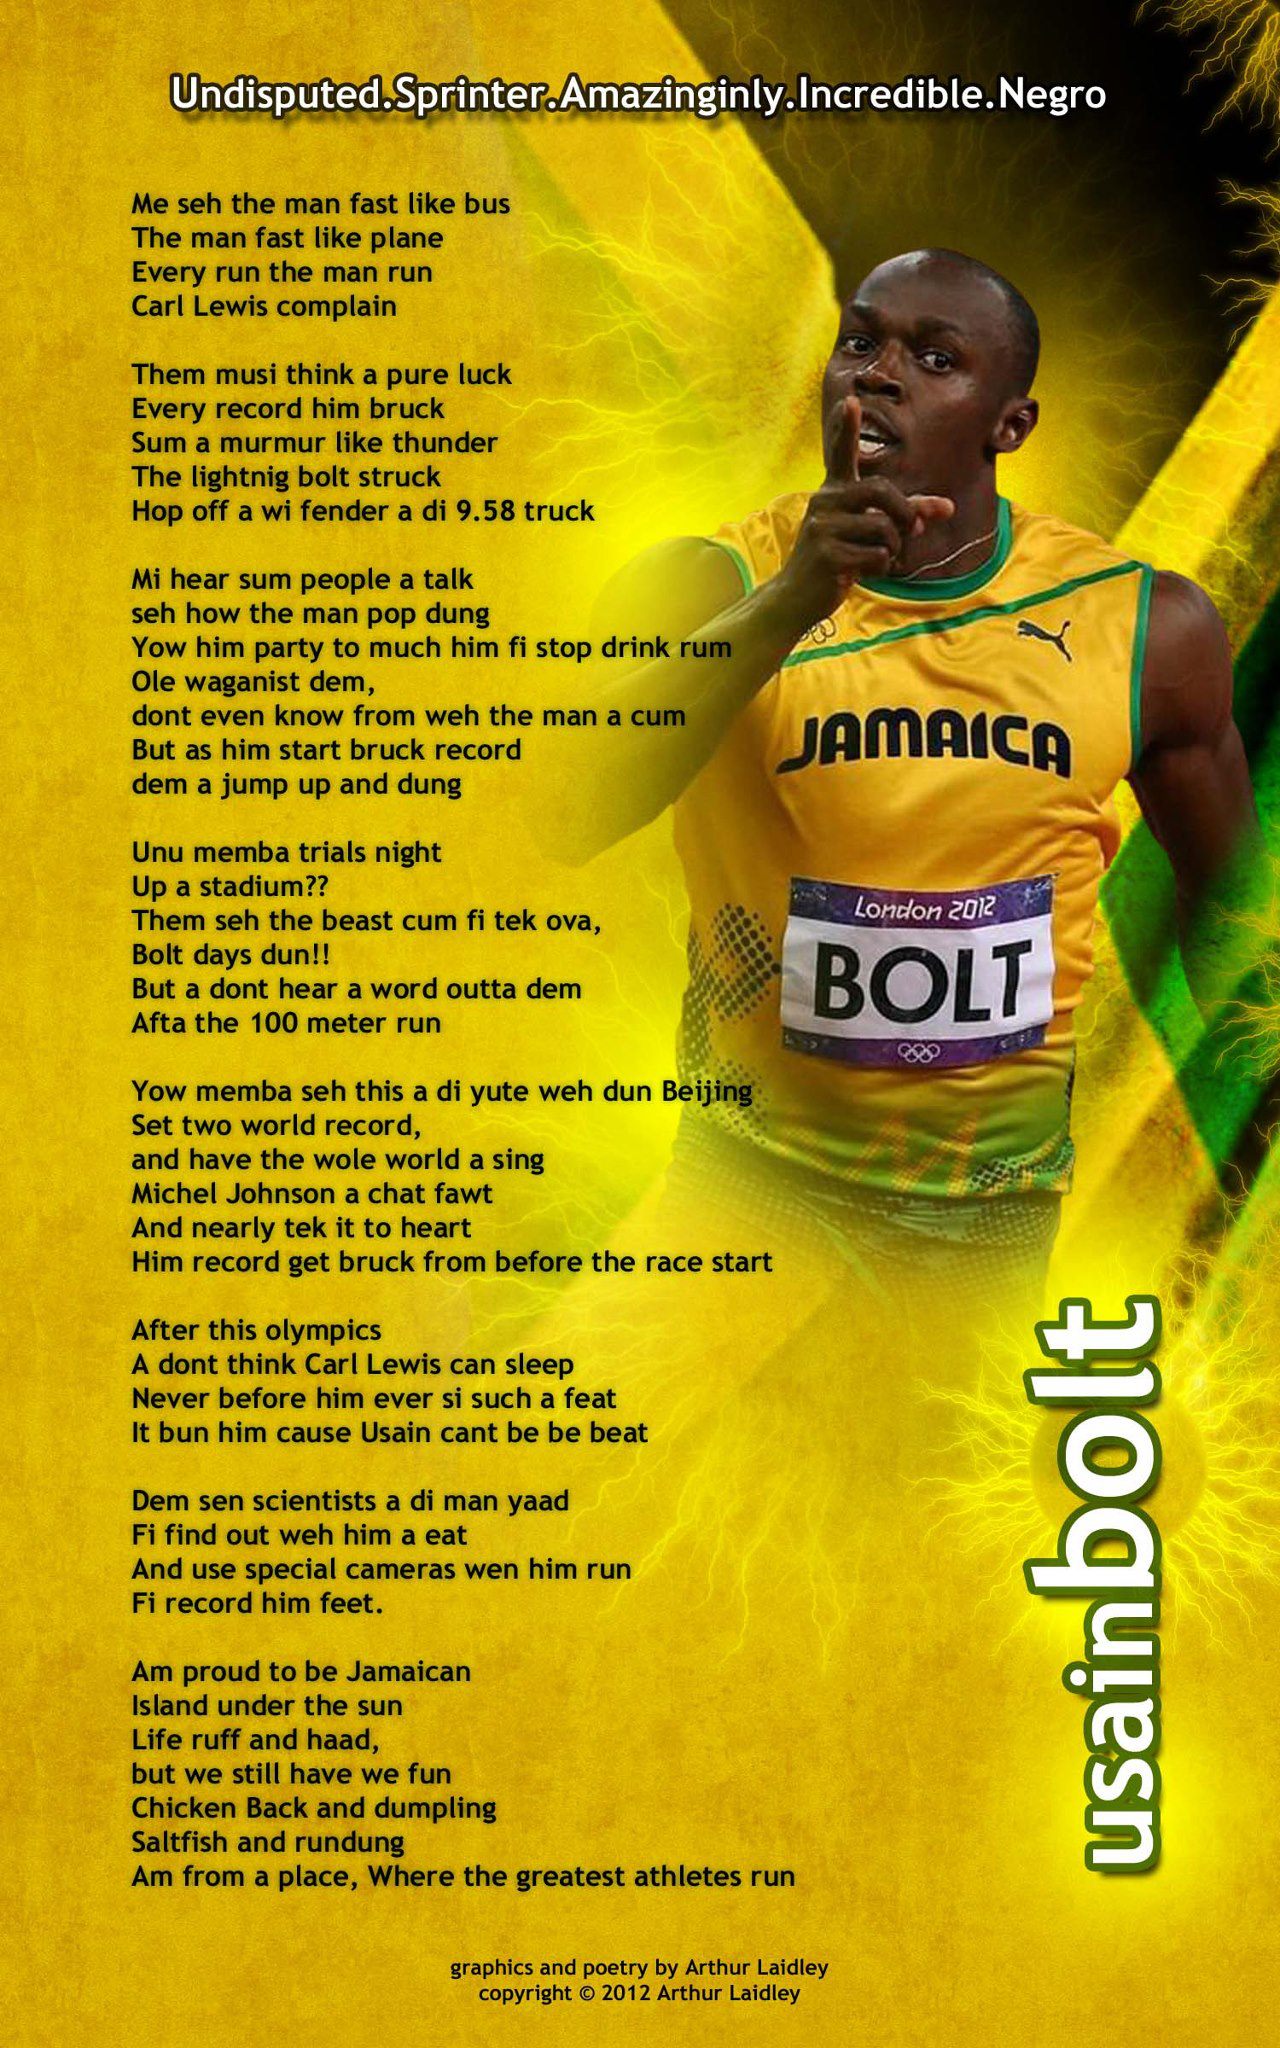 Posted in Uncategorized and tagged Independence Day Jamaica Jamaican Patois life Lifestyle London 2012 love Olympics Pride Sports track and field